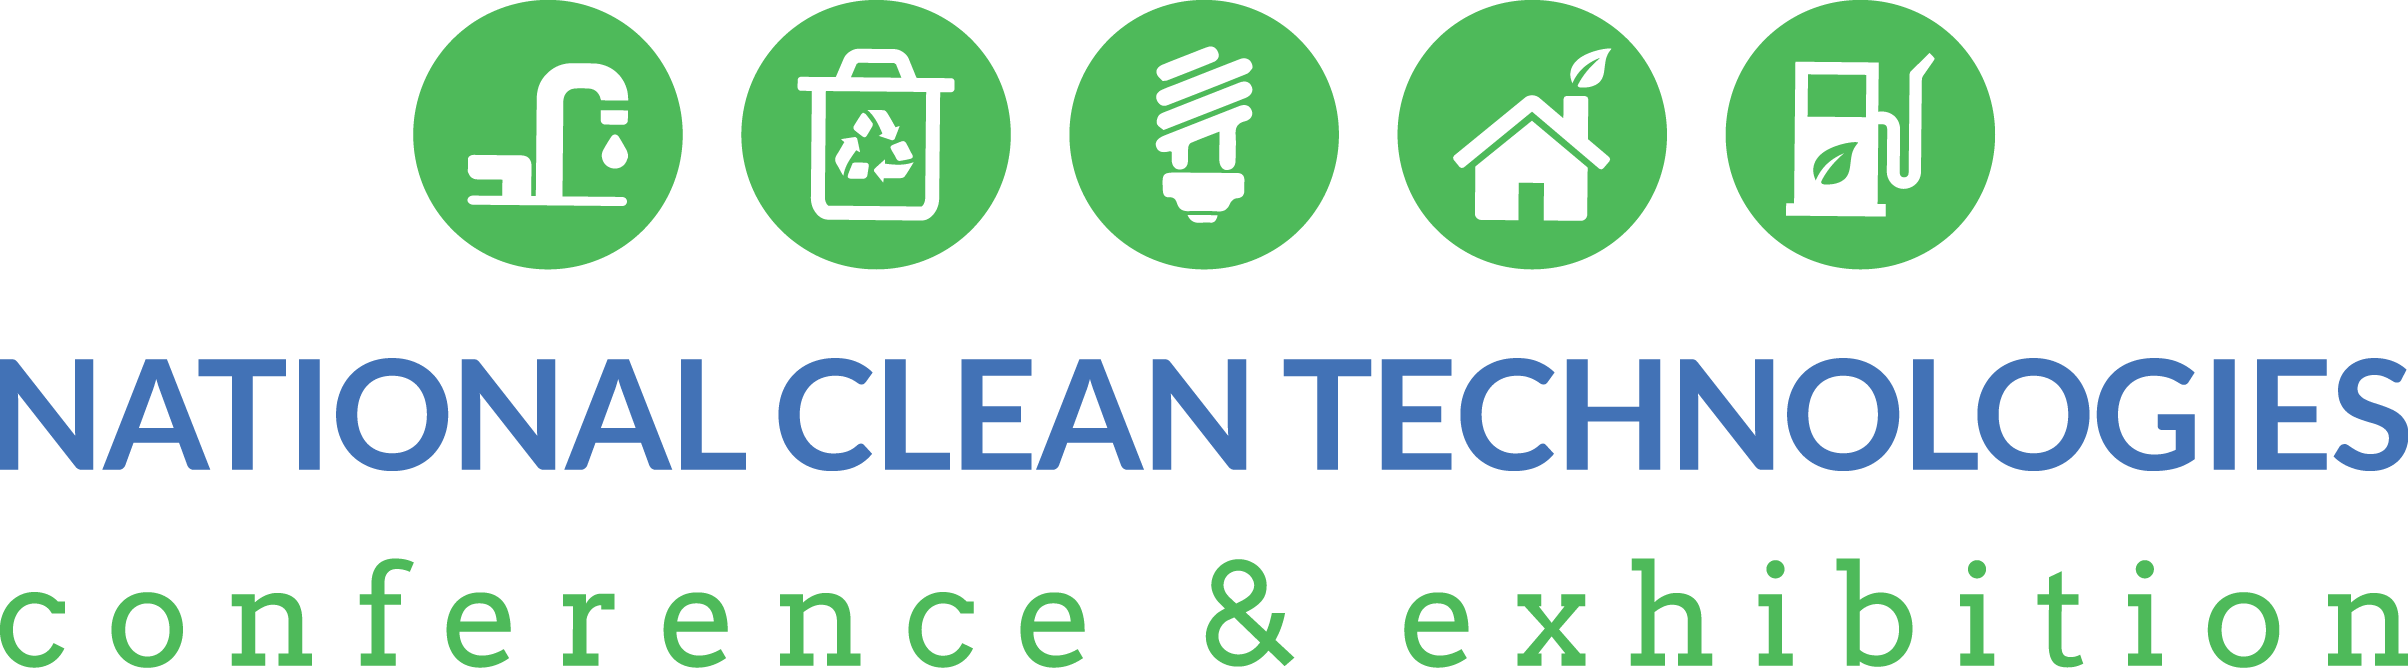 National Clean Technologies Conference & Exhibition